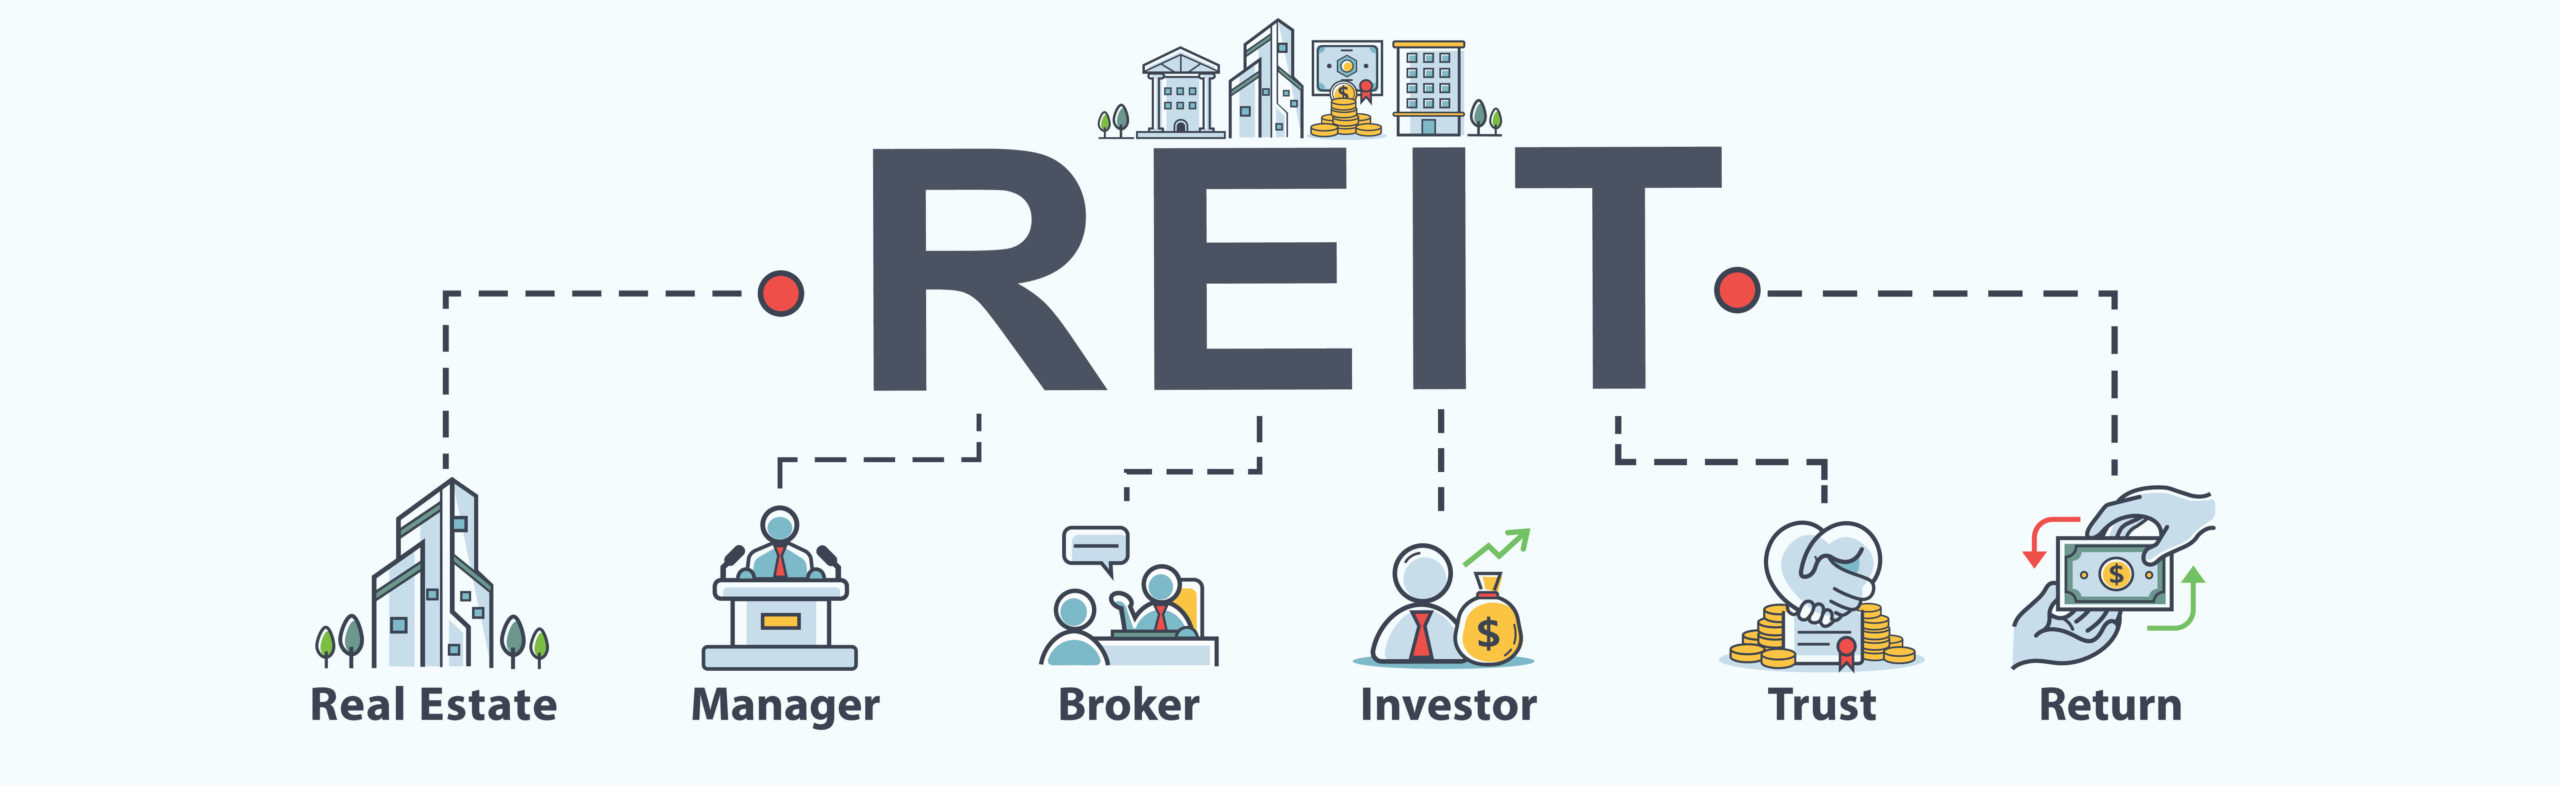 How to Qualify As REIT